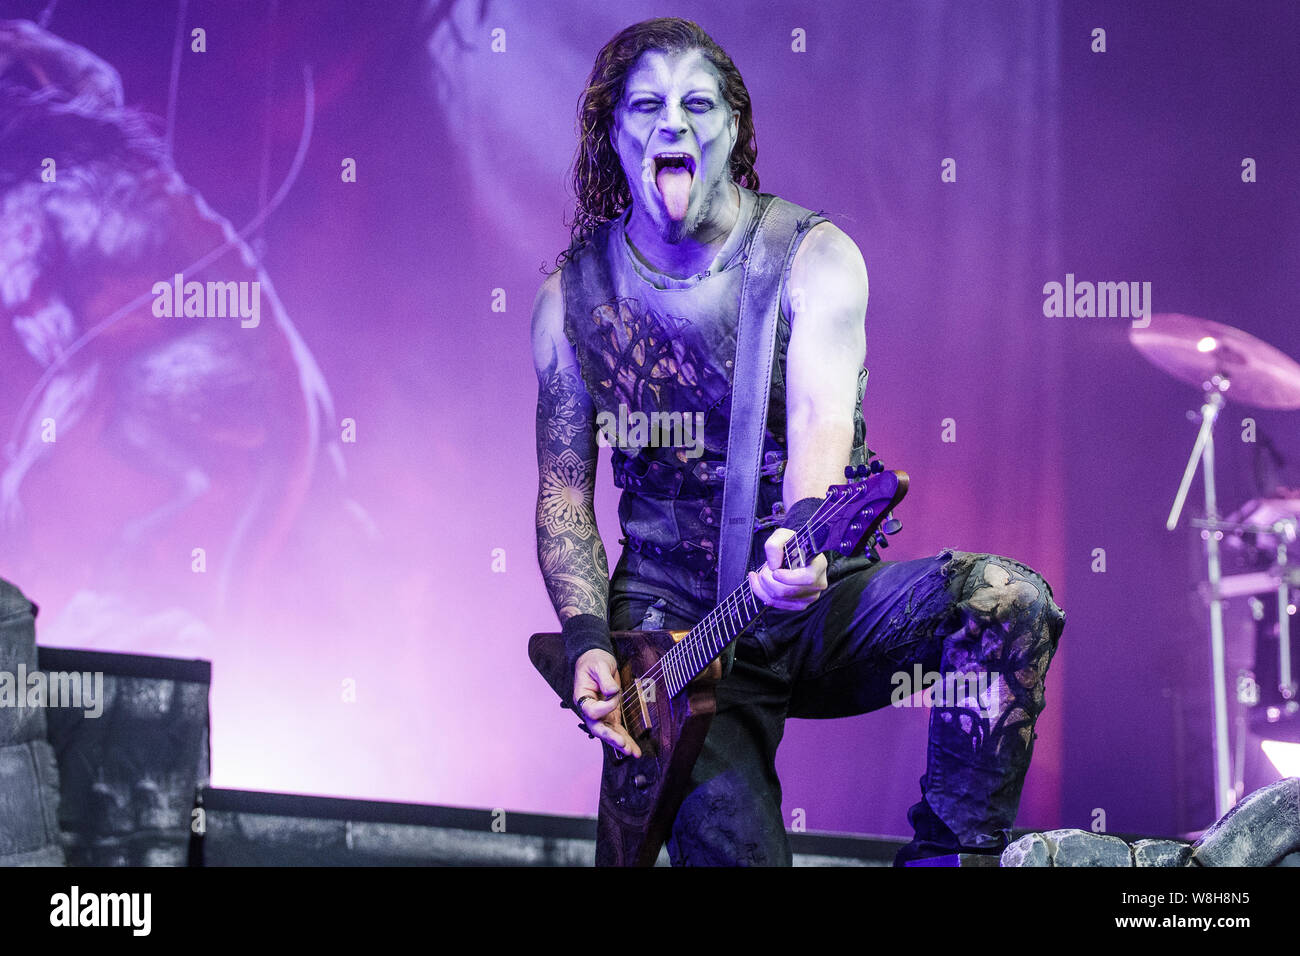 Powerwolf perform live on stage at Bloodstock Open Air Festival, UK, 9th Aug, 2019. Stock Photo